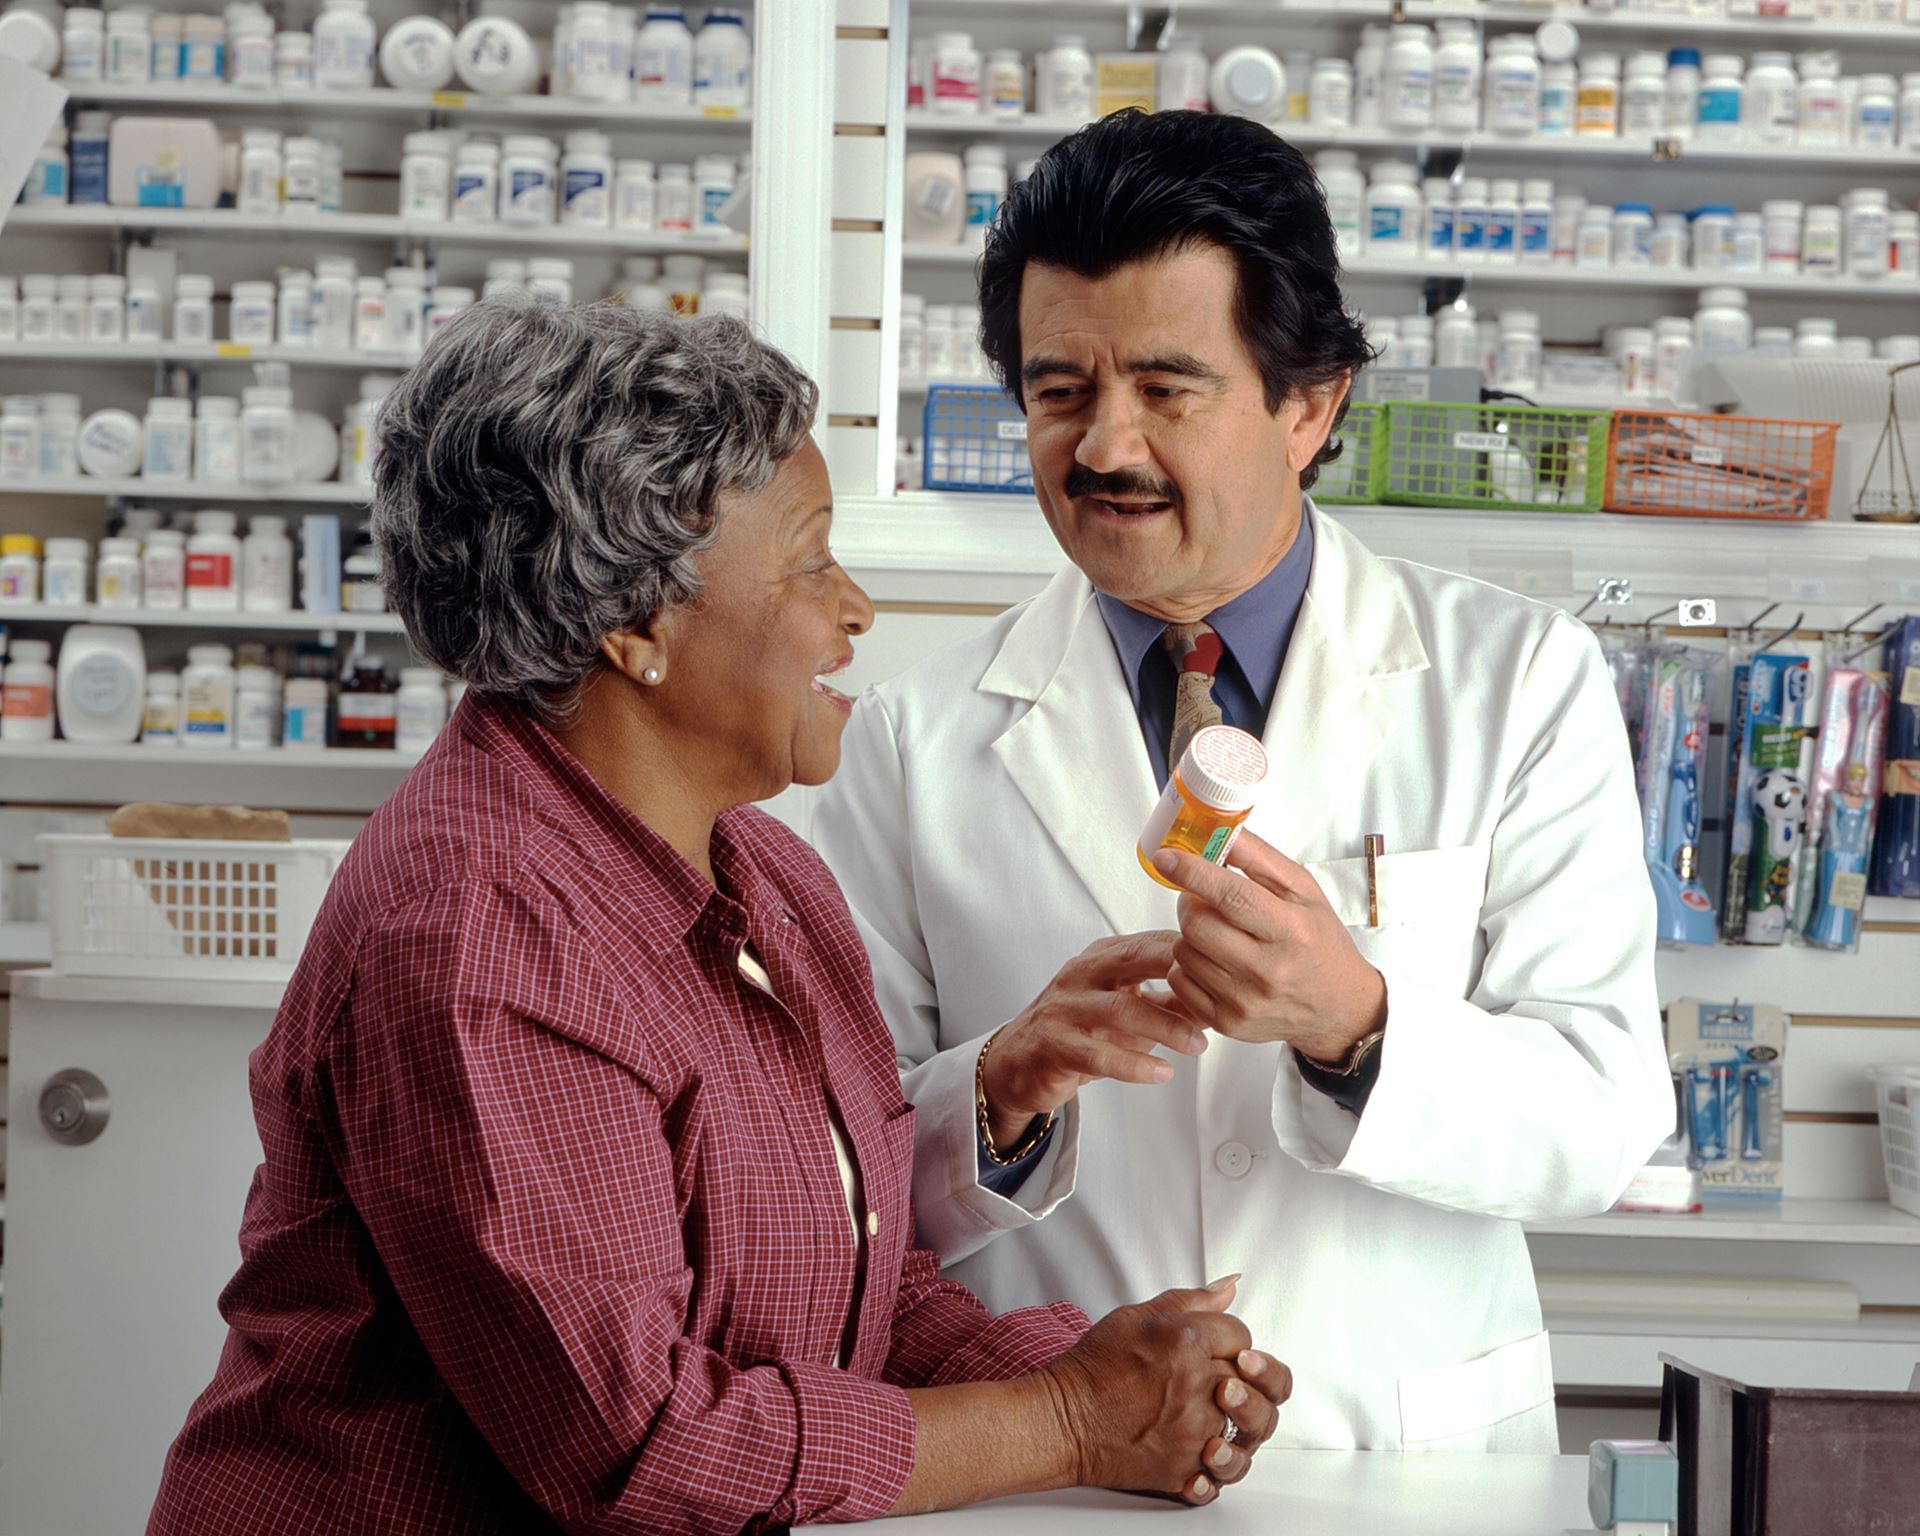 A pharmacist showing a lady a bottle of pills